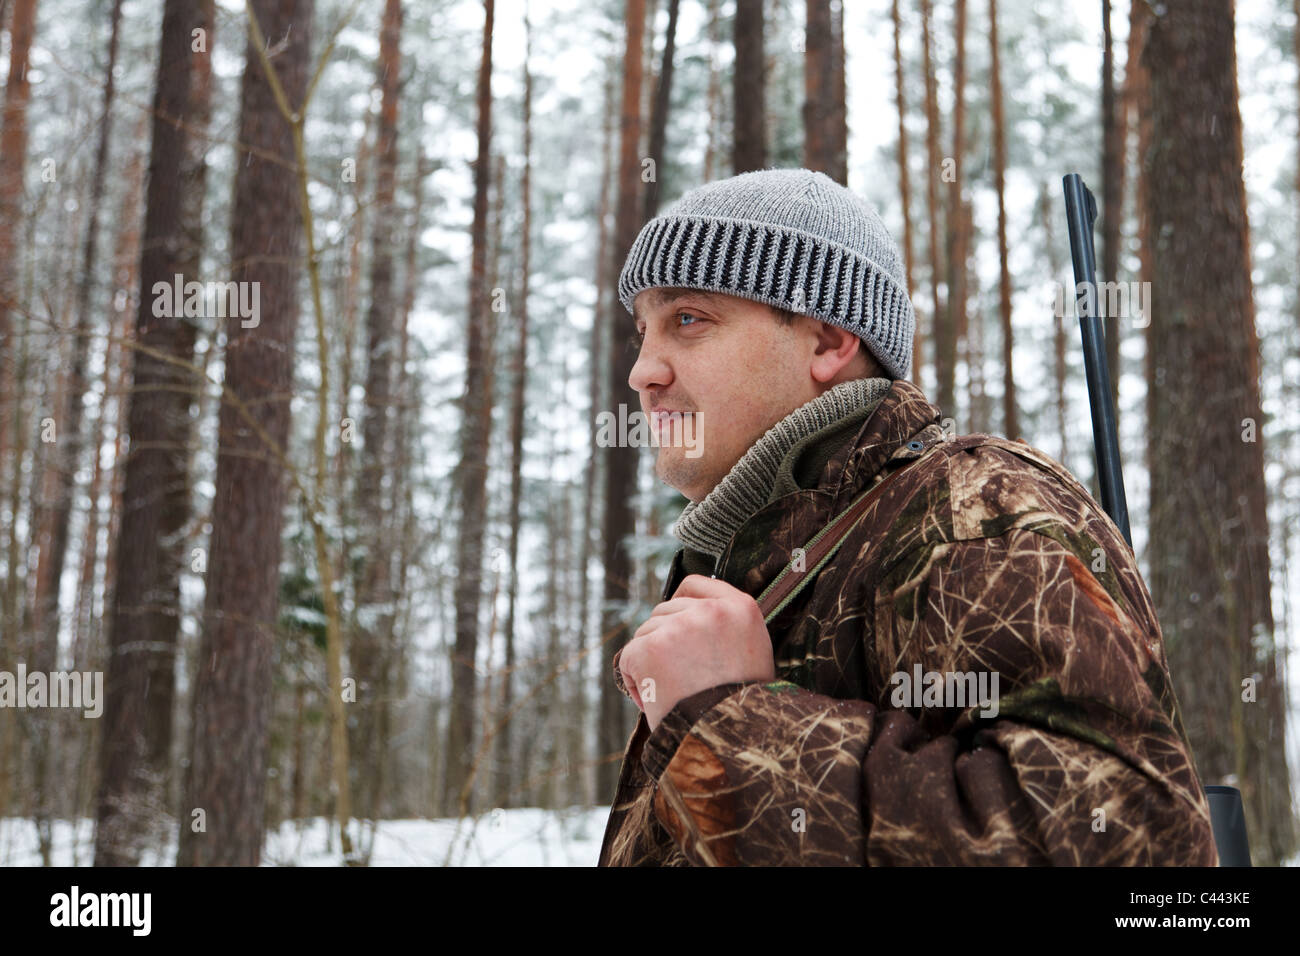 Hunter portrait at winter forest. Stock Photo